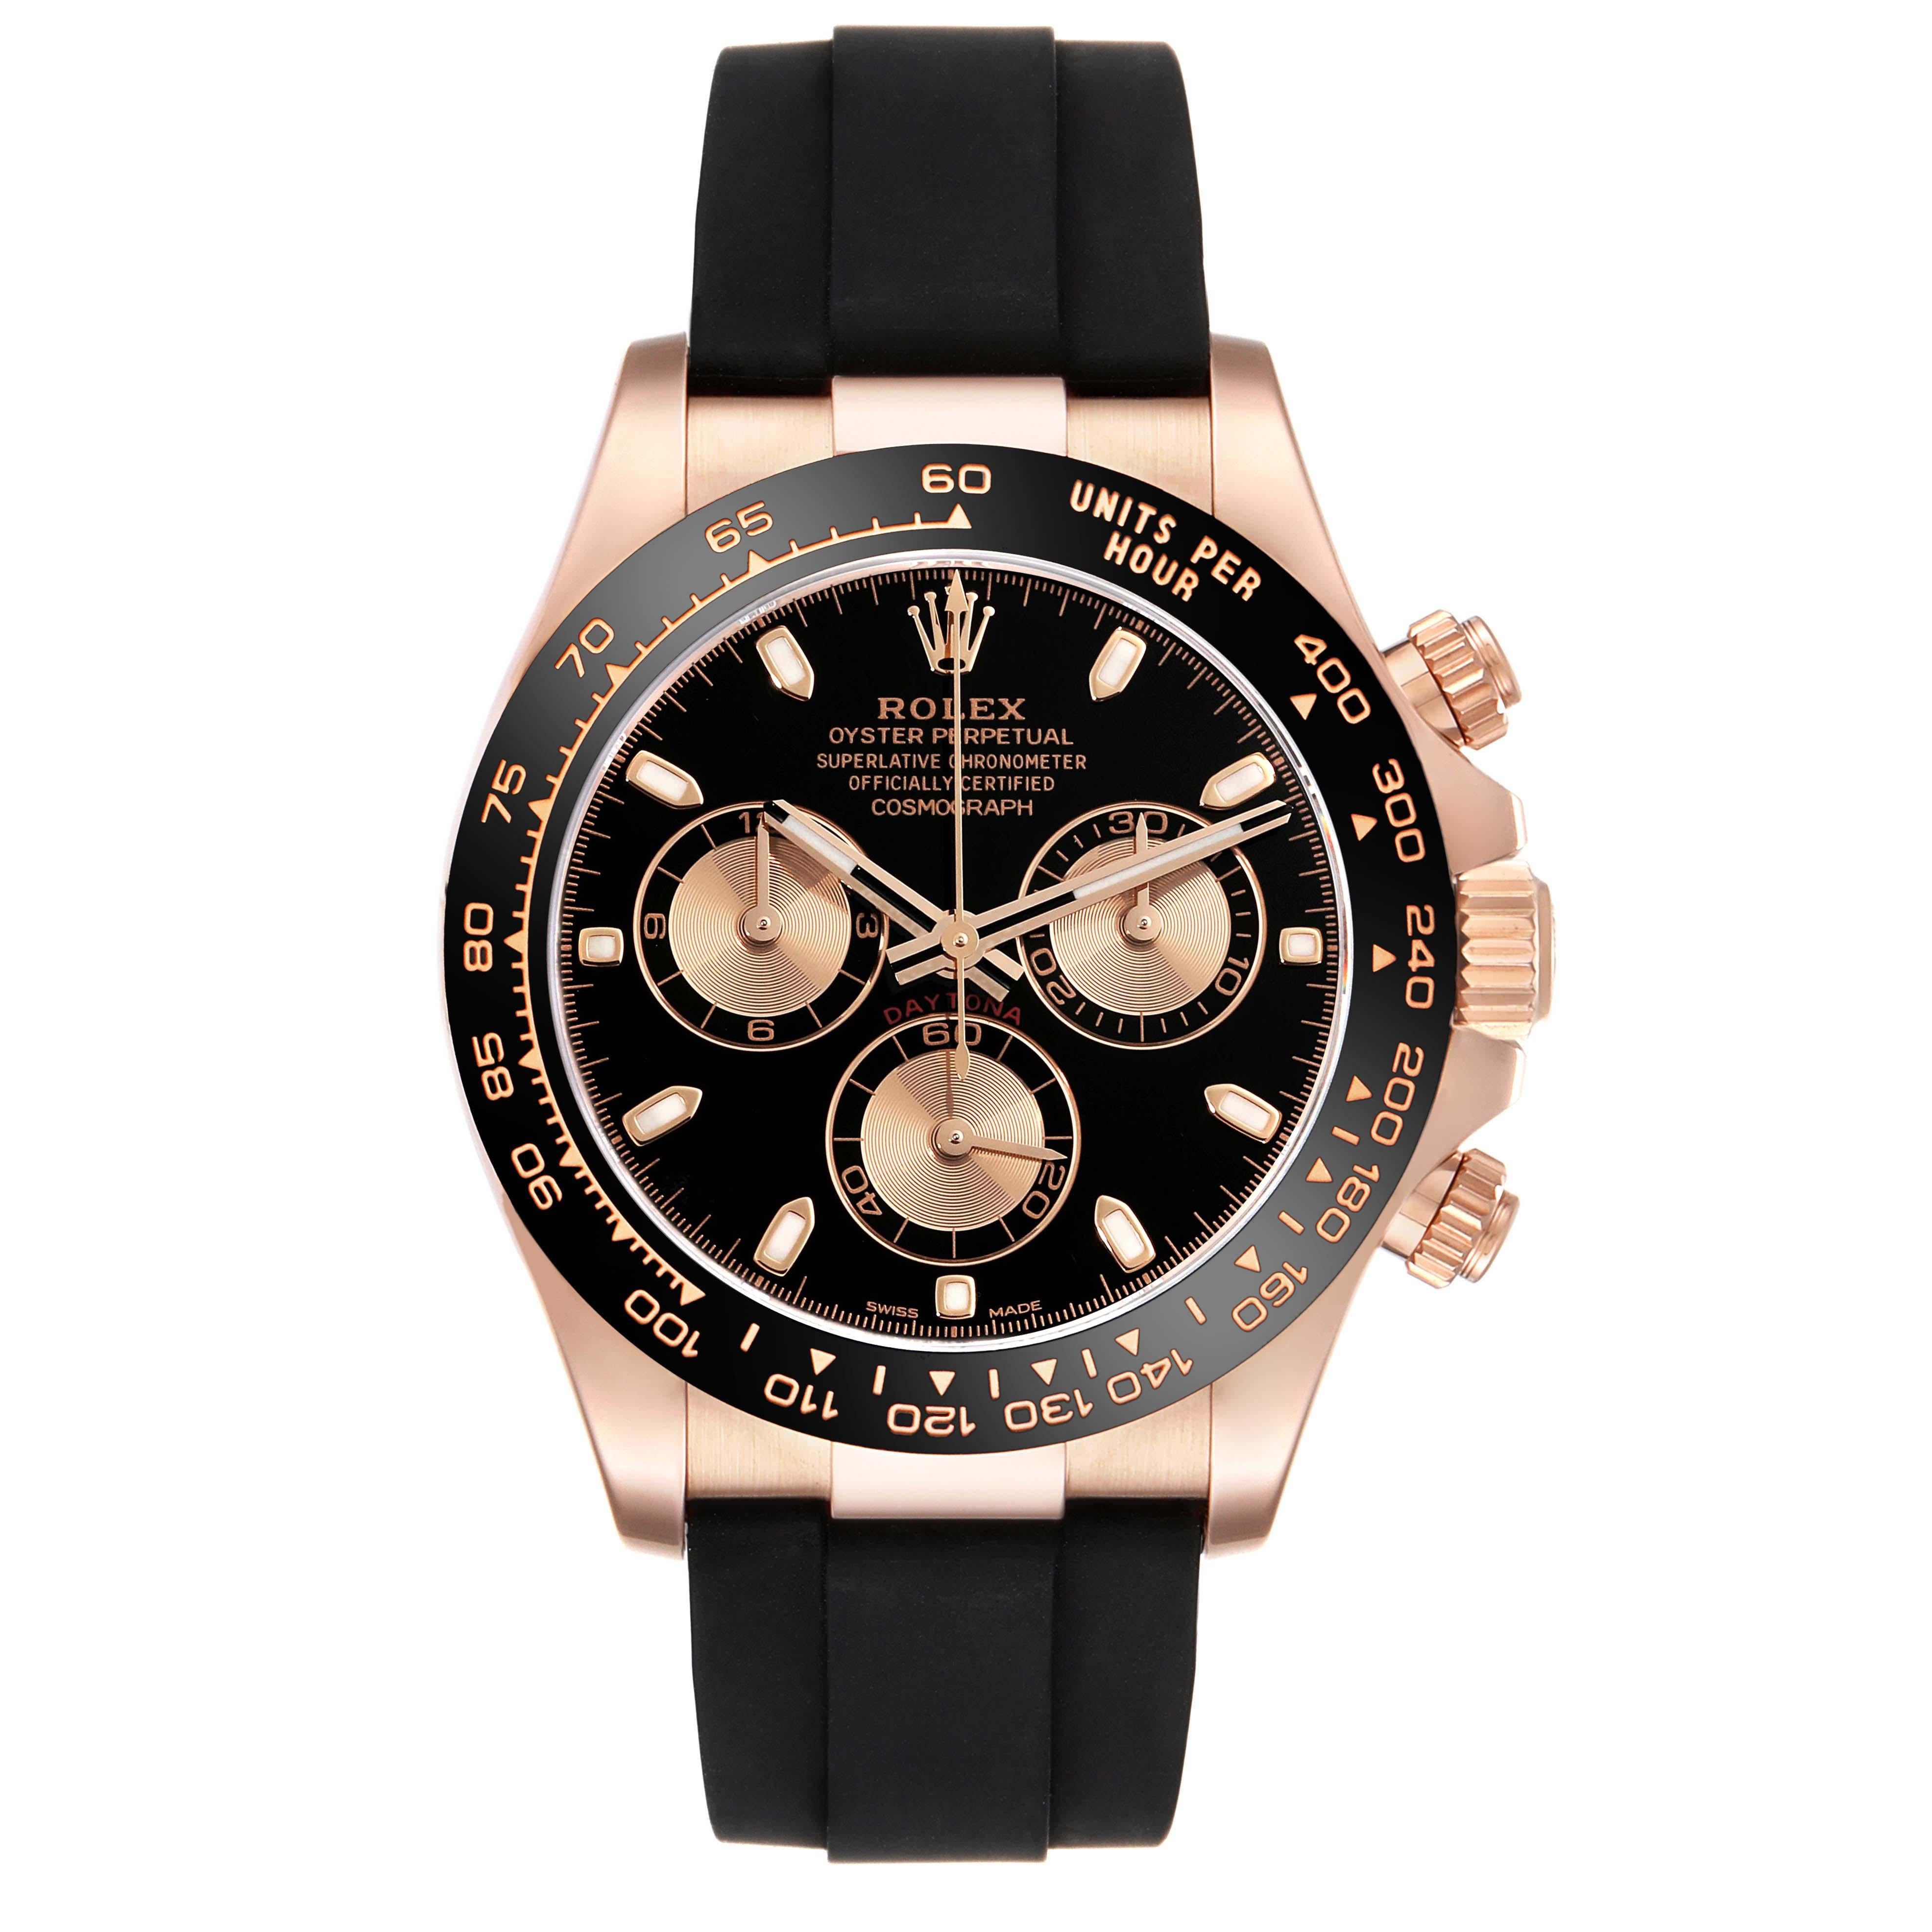 Rolex Cosmograph Daytona Rose Gold Mens Watch 116515 Box Card. Officially certified chronometer automatic self-winding movement. 18k rose gold case 40.0 mm in diameter. Special screw-down push buttons. Screw-down caseback. Chronograph pushers and